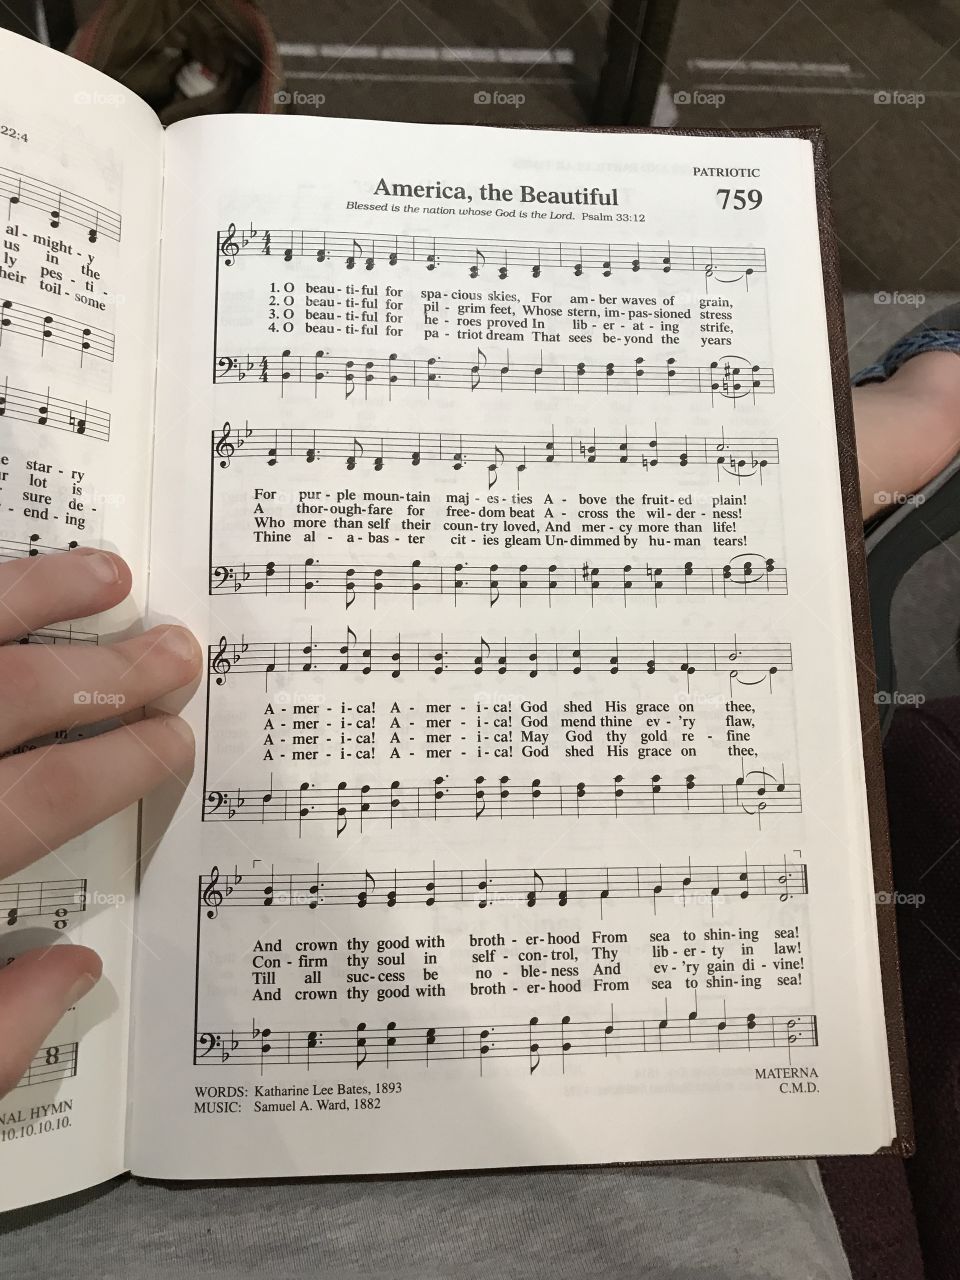 America, the Beautiful sheet music straight from a Nazarene Hymnal.